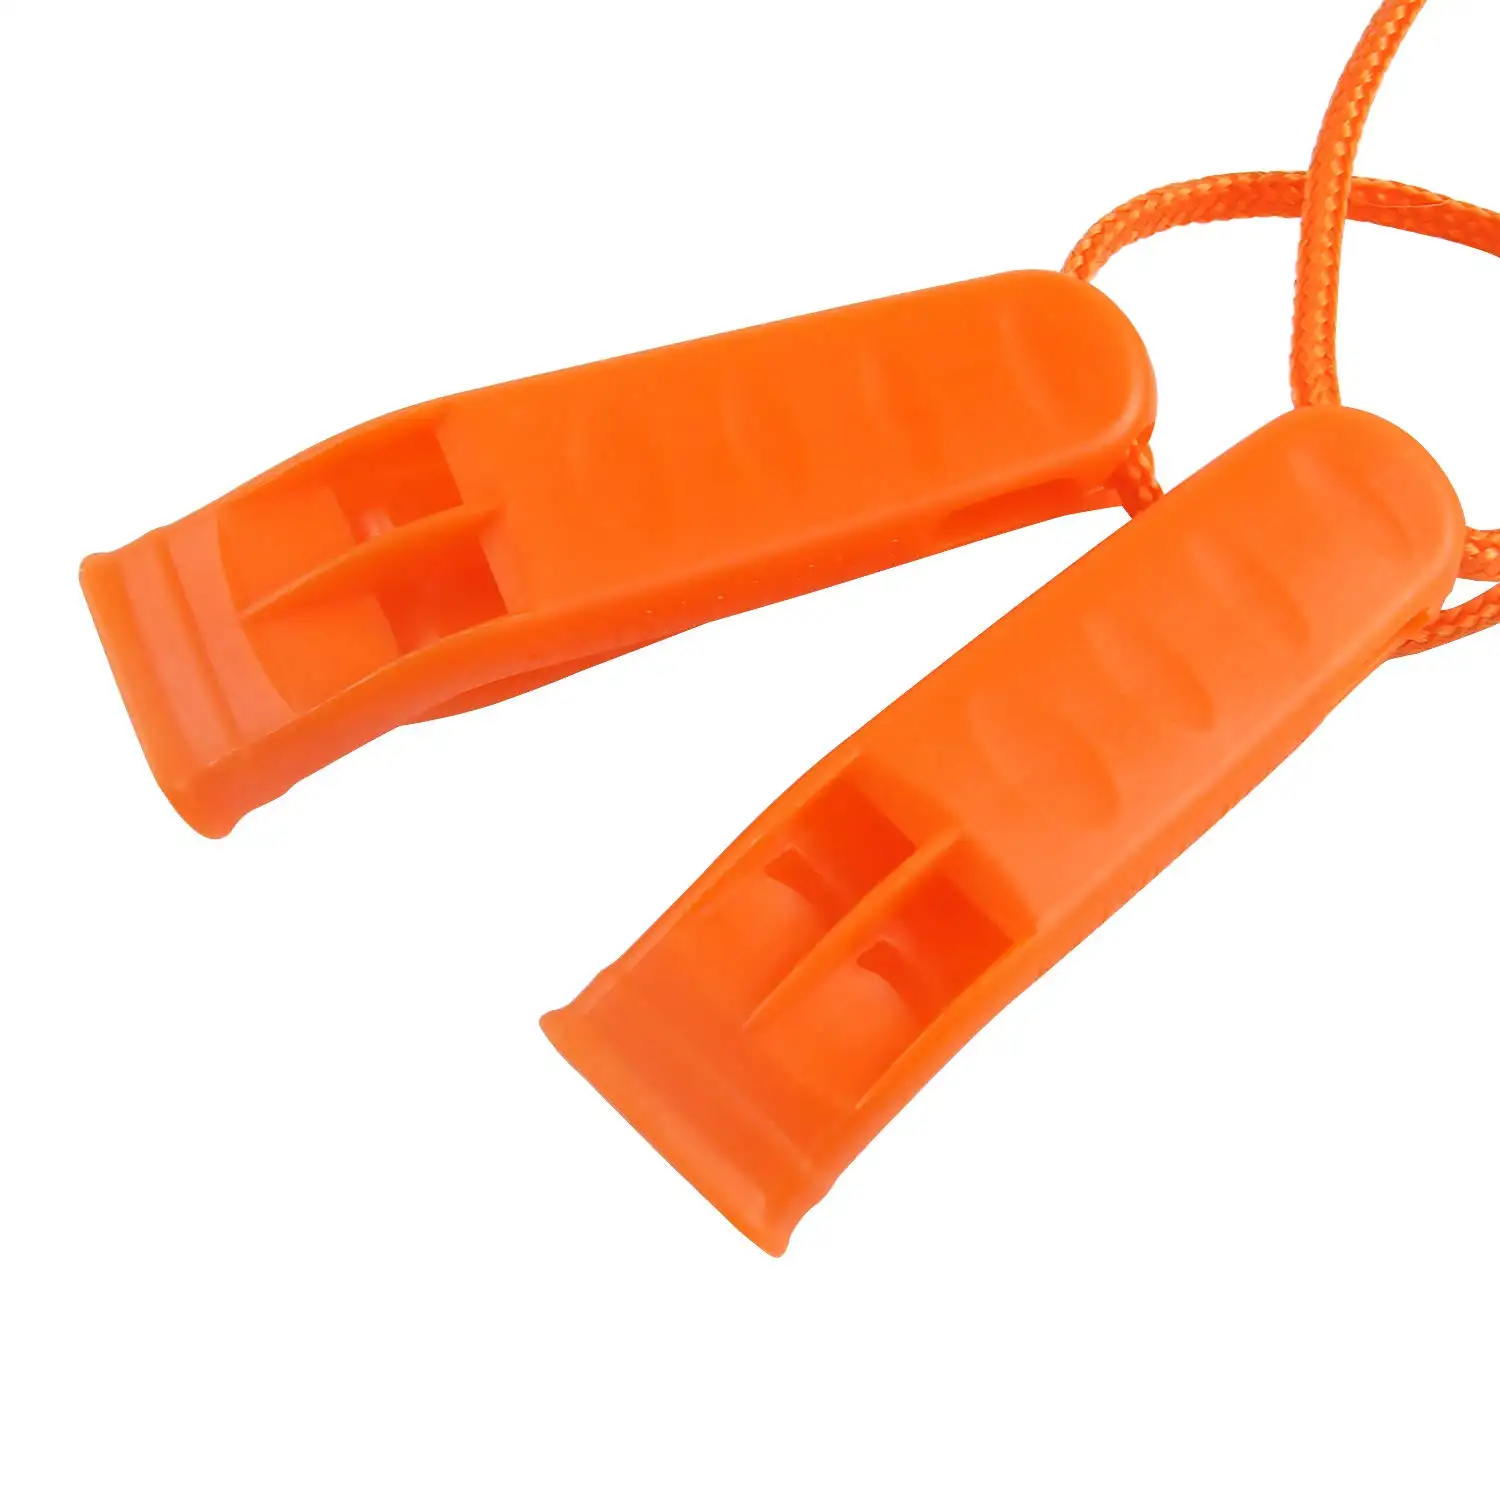 Wholesale Outdoor Orange Plastic Emergency Survival Rescue Safety Flat Whistle Lanyard Survival Whistle For Outdoor Hiking